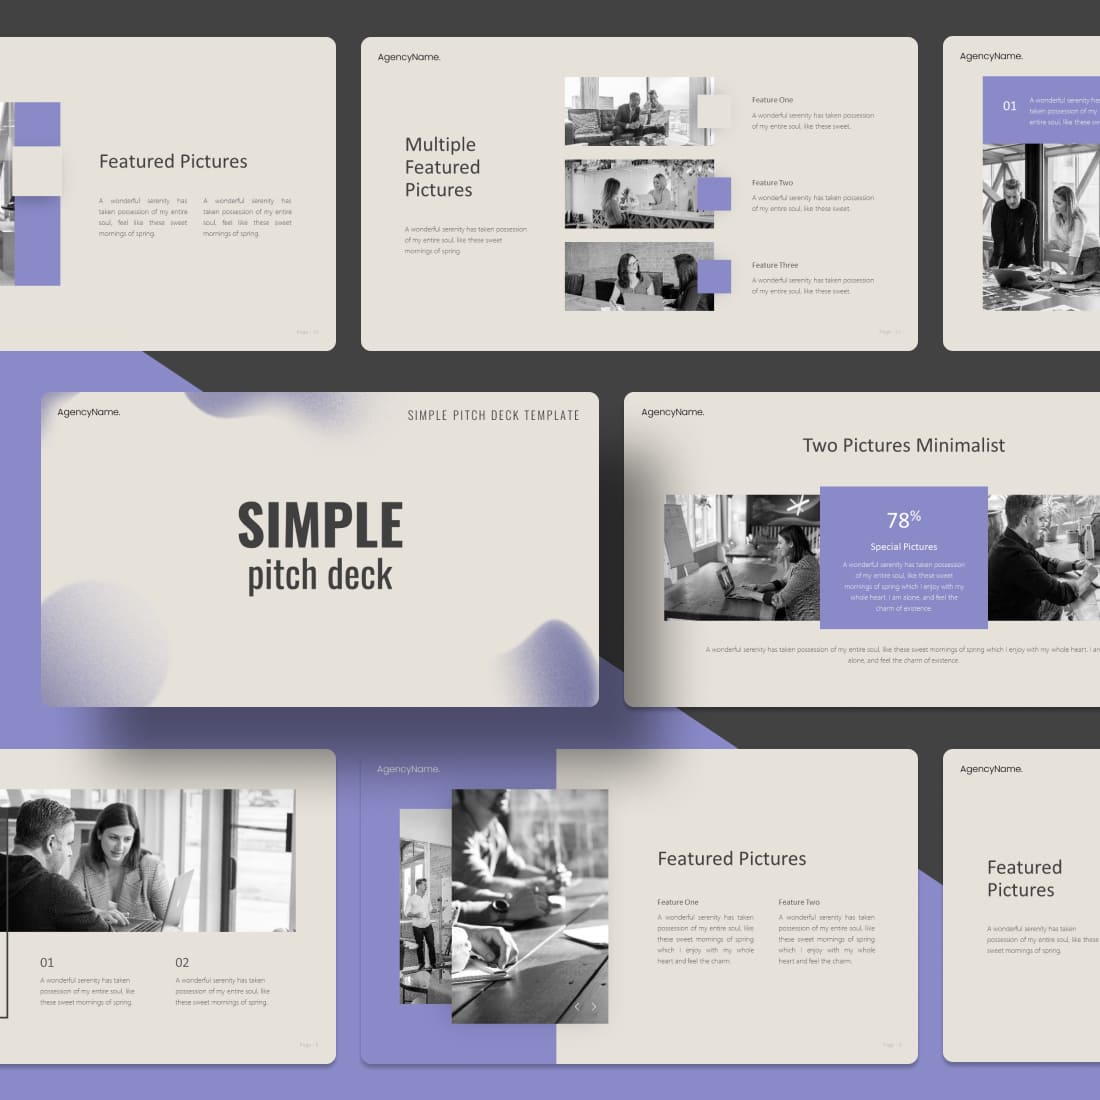 Simple Pitch Deck Presentation Template cover.